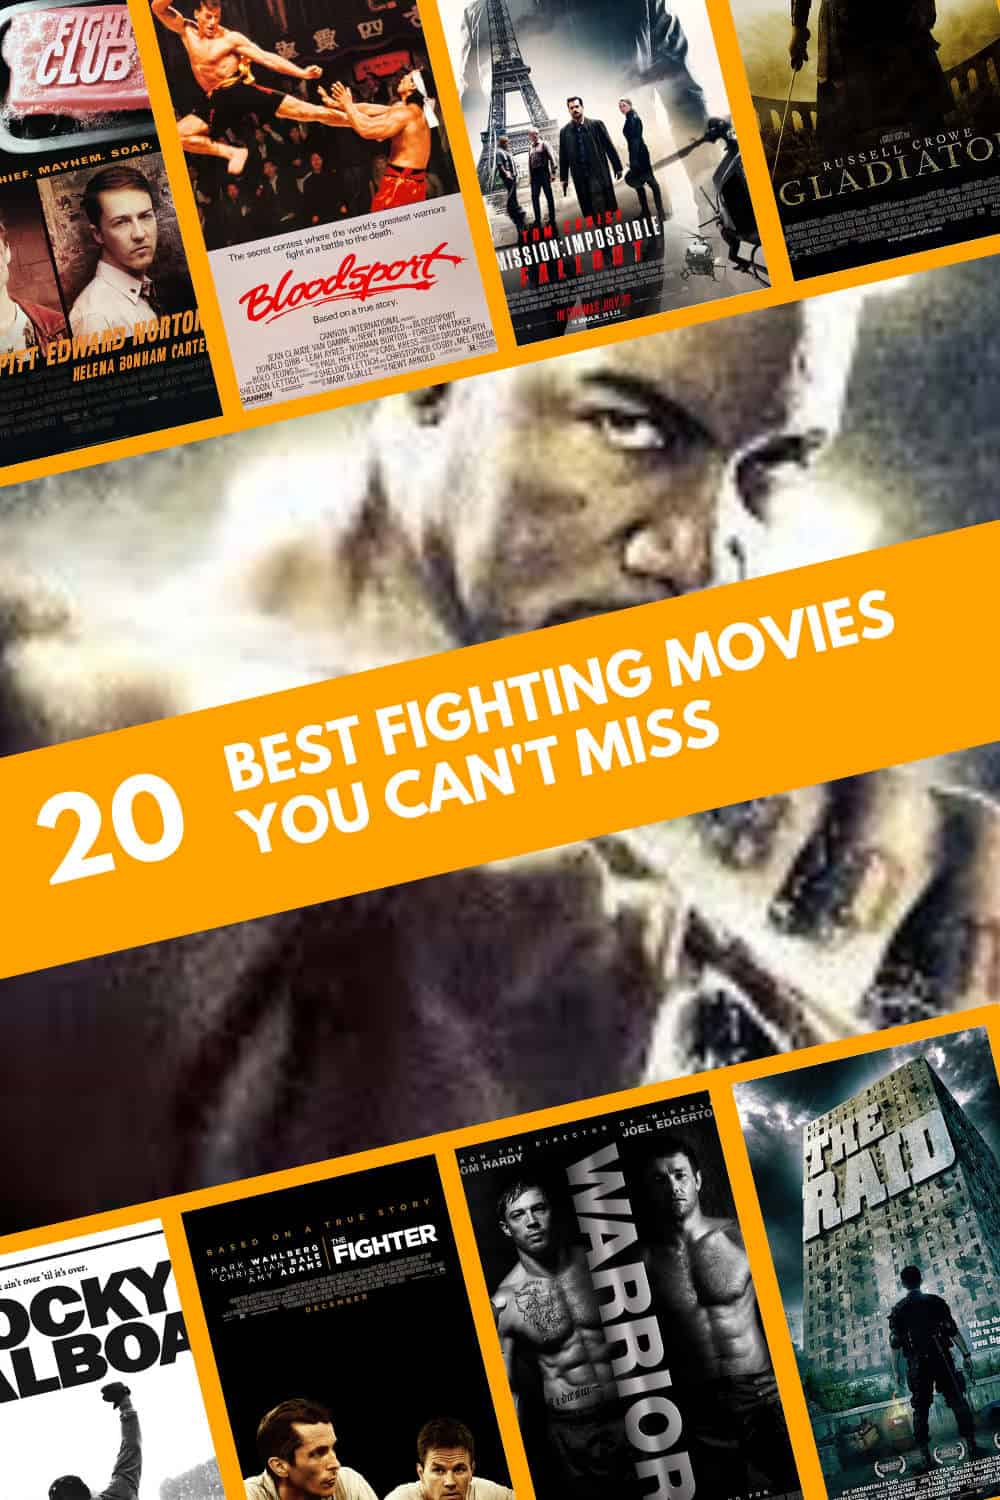 Fighting Movie You Can't Miss